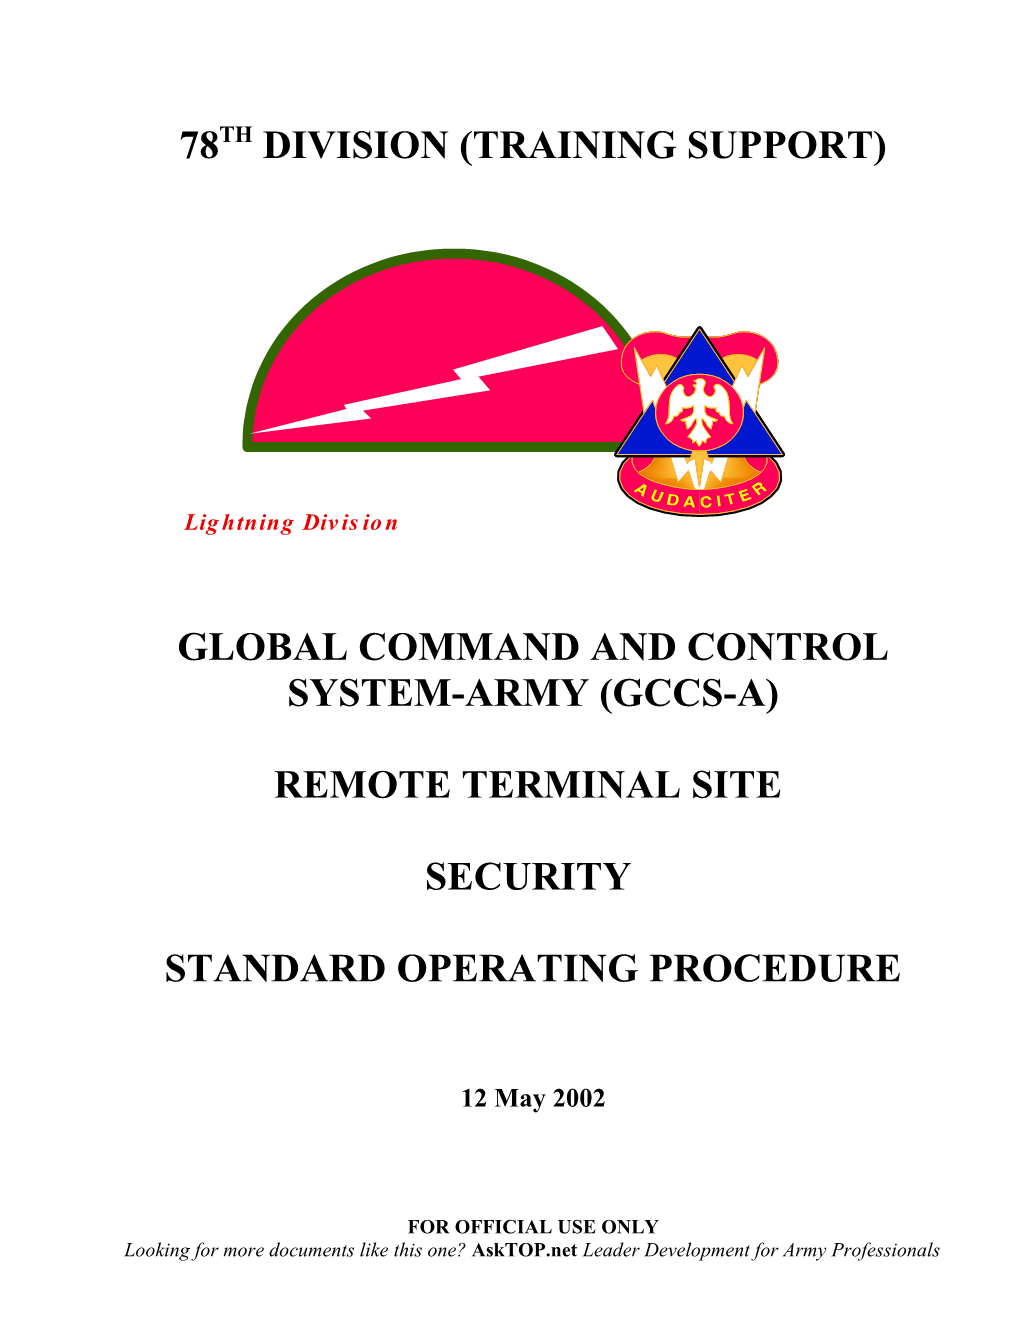 Global Command and Control System-Army (Gccs-A)